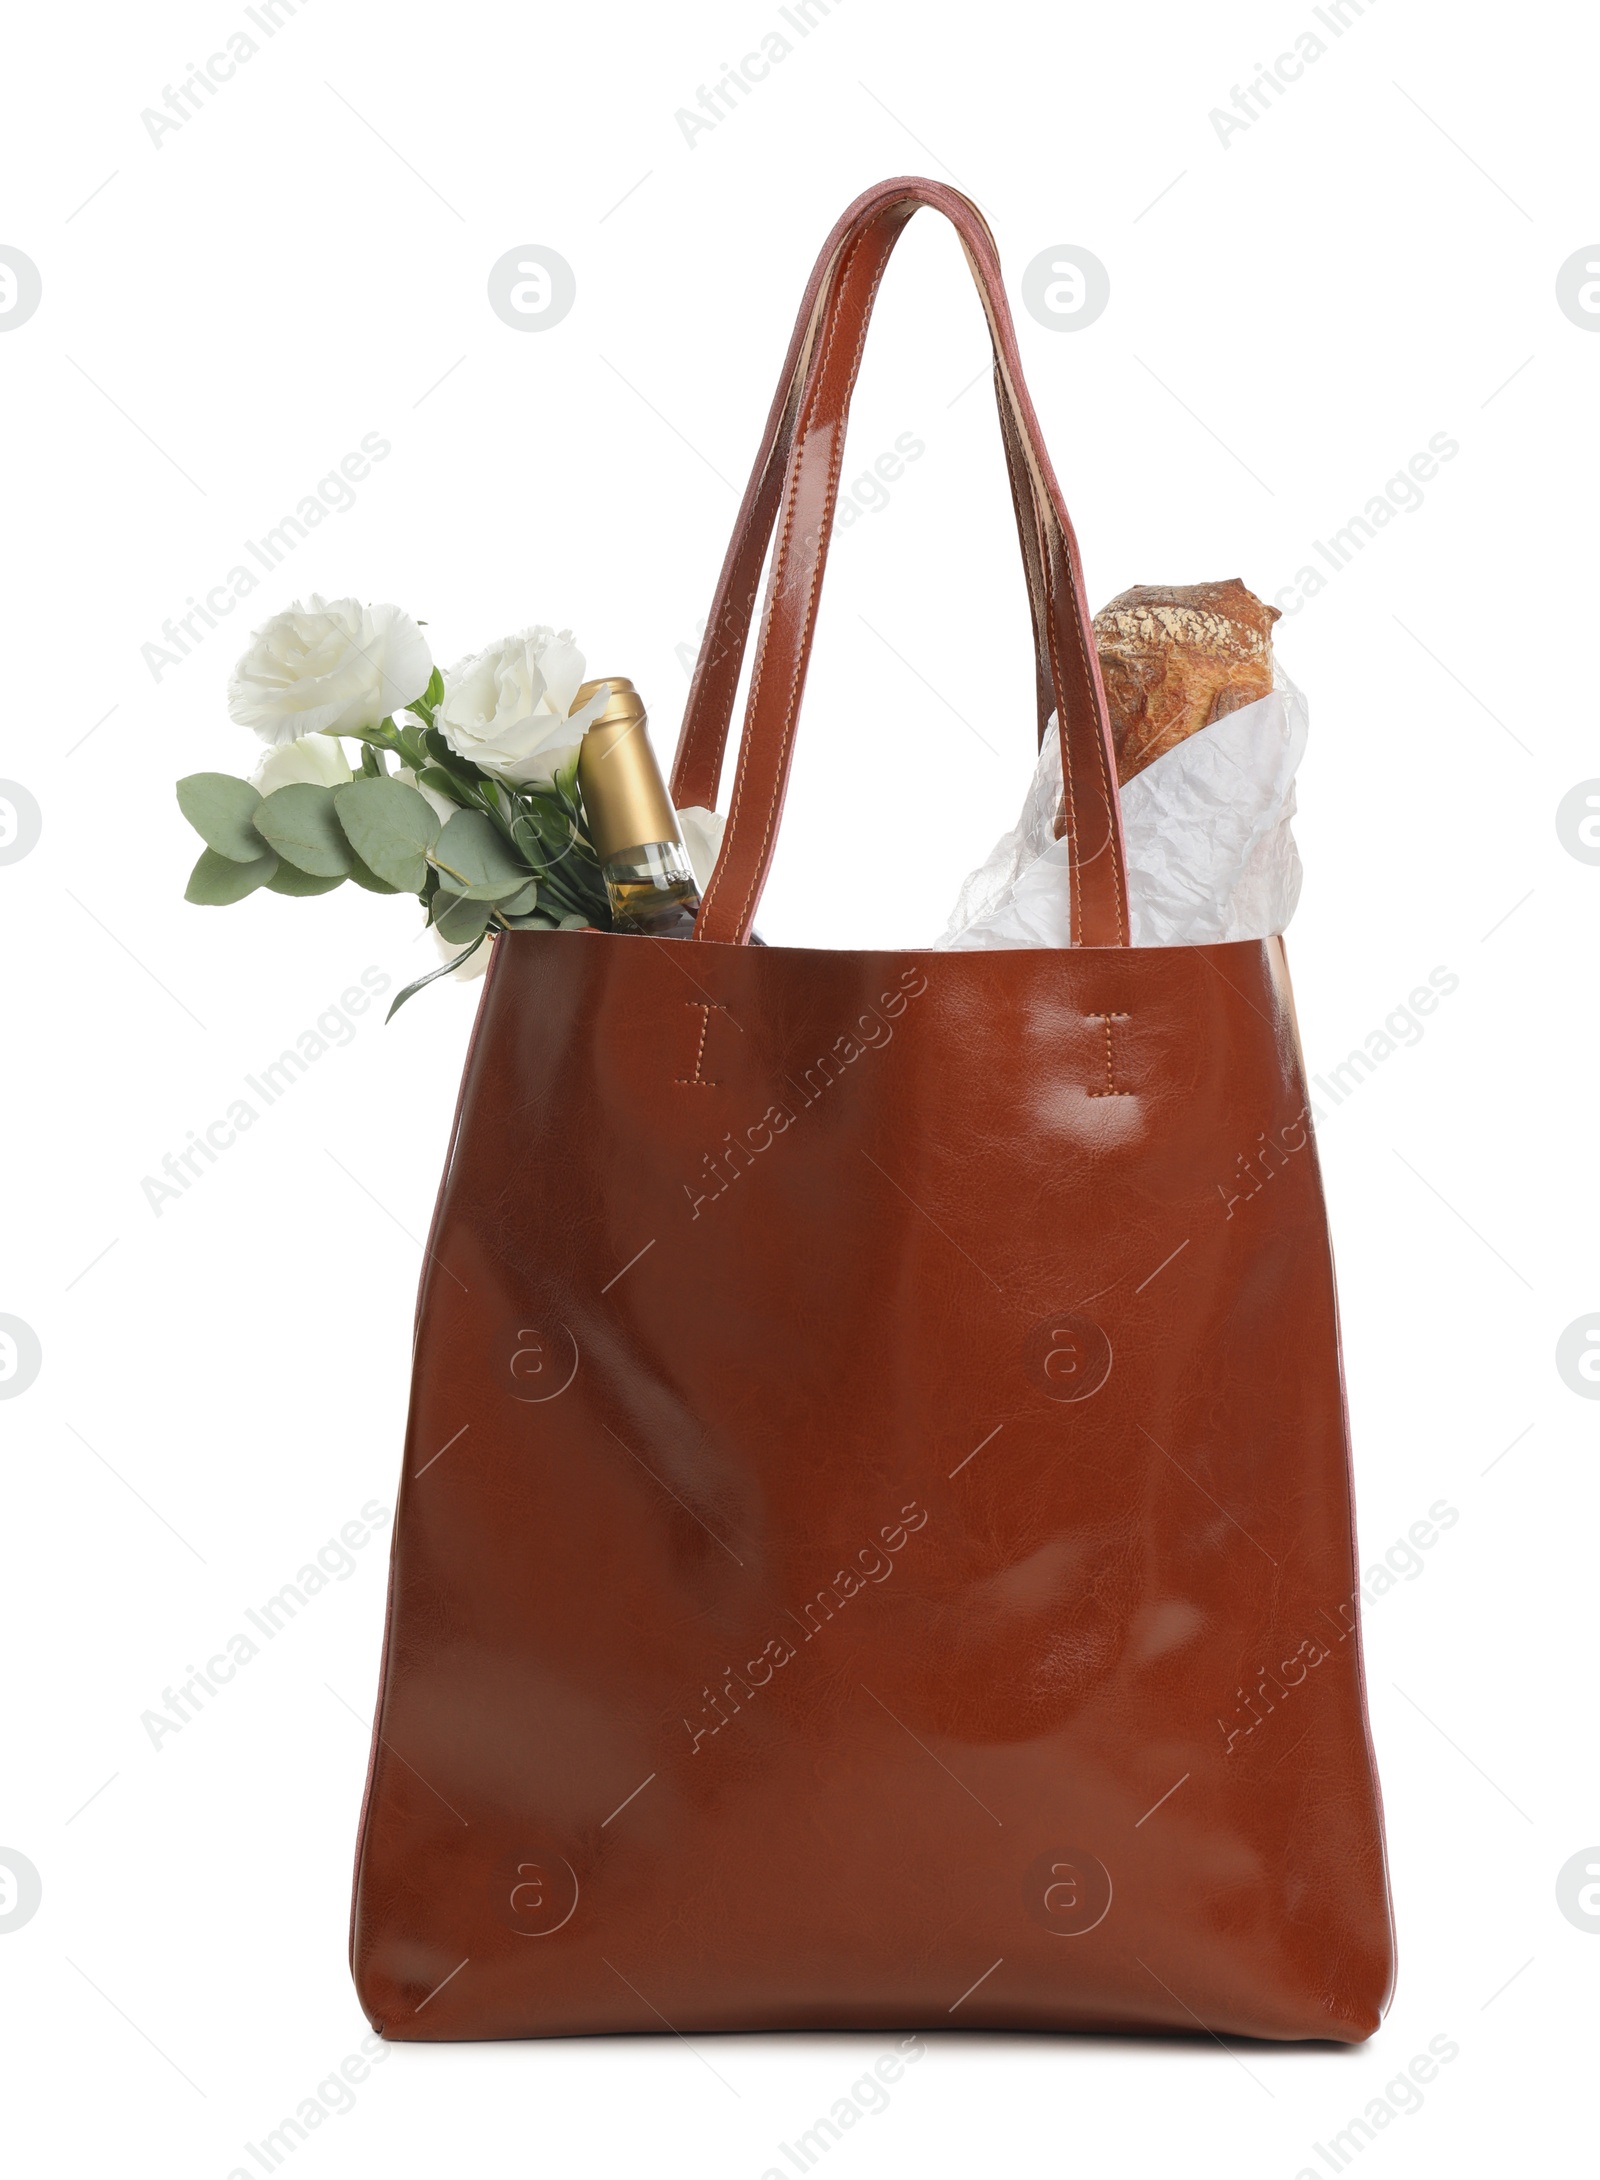 Photo of New leather shopper bag with purchases on white background